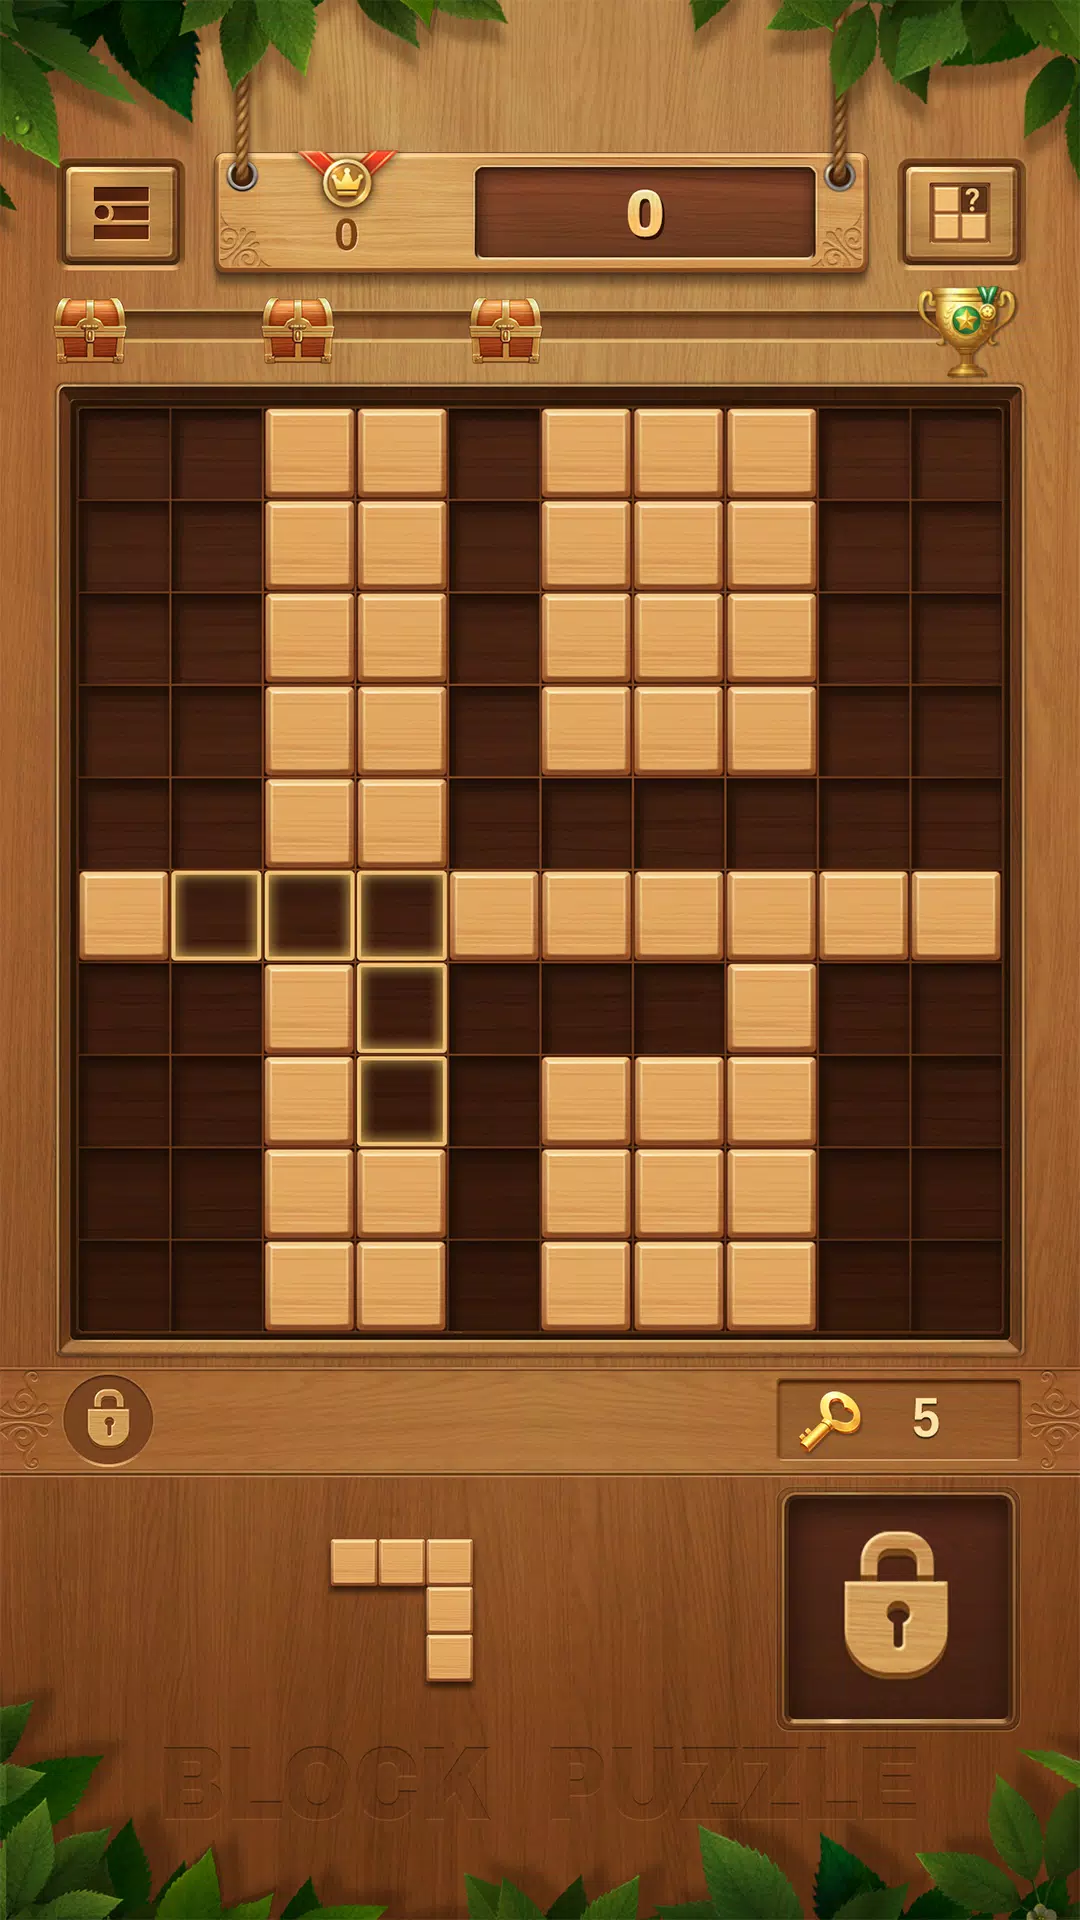 QBlock: Wood Block Puzzle Game Mod apk [Unlimited money] download - QBlock:  Wood Block Puzzle Game MOD apk 2.7.8 free for Android.